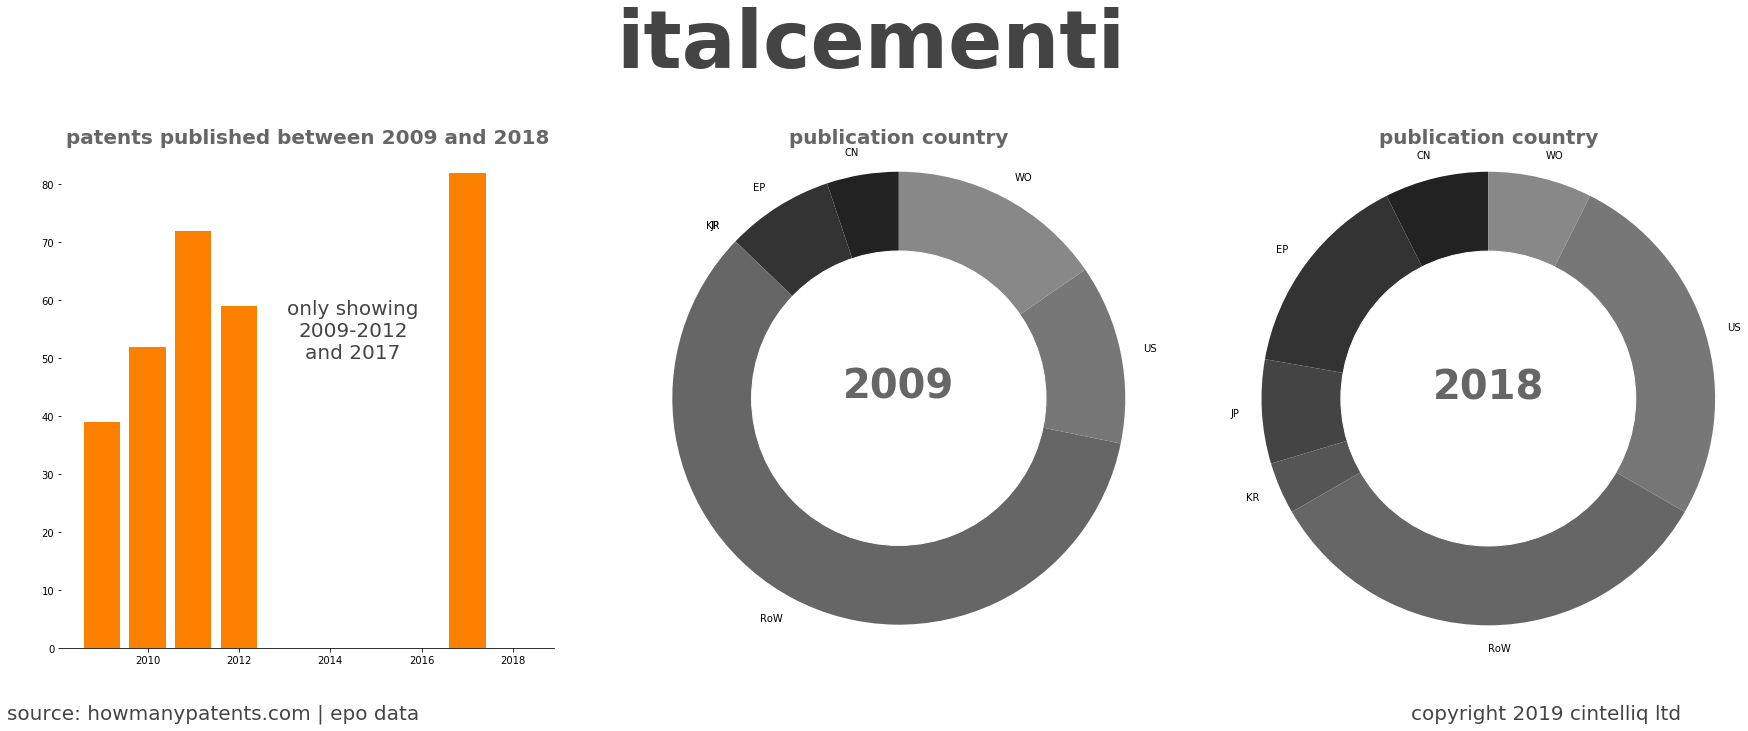 summary of patents for Italcementi